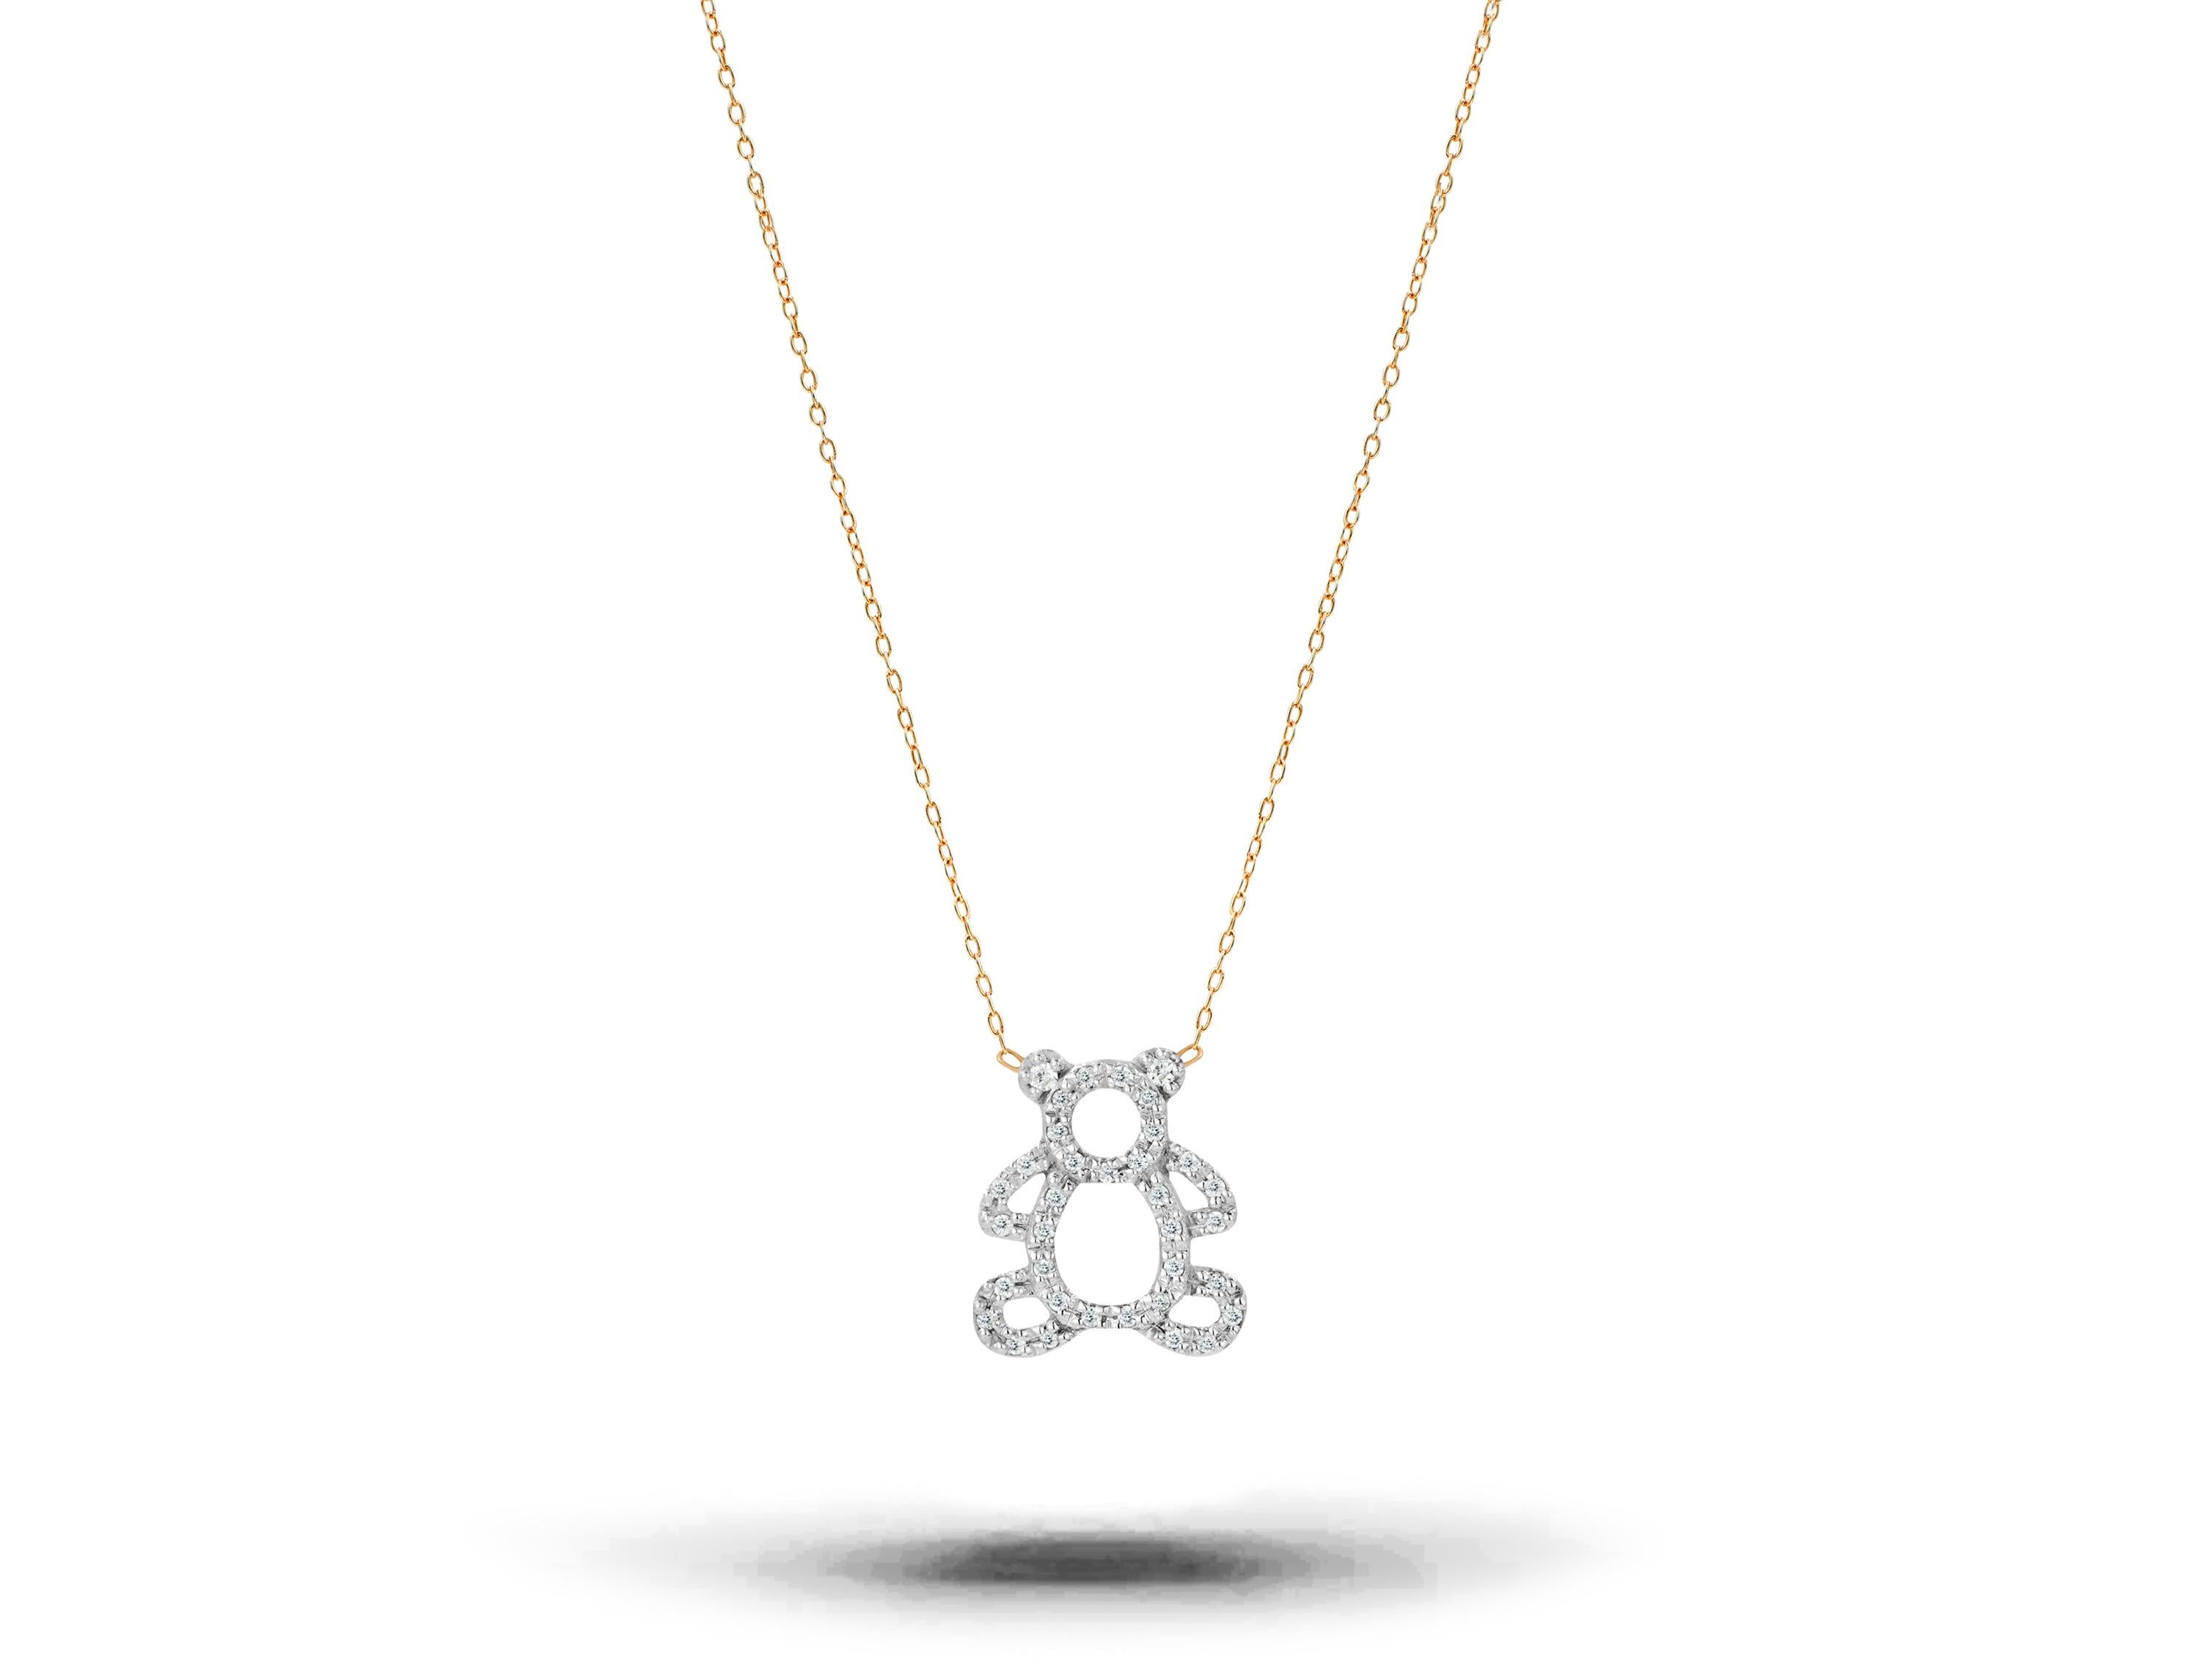 Diamond Teddy Bear Charm Necklace is made of 18k solid gold.
Available in three colors of gold:  White Gold / Rose Gold / Yellow Gold.

Natural genuine round cut diamond, each diamond is hand selected by me to ensure quality and set by a master